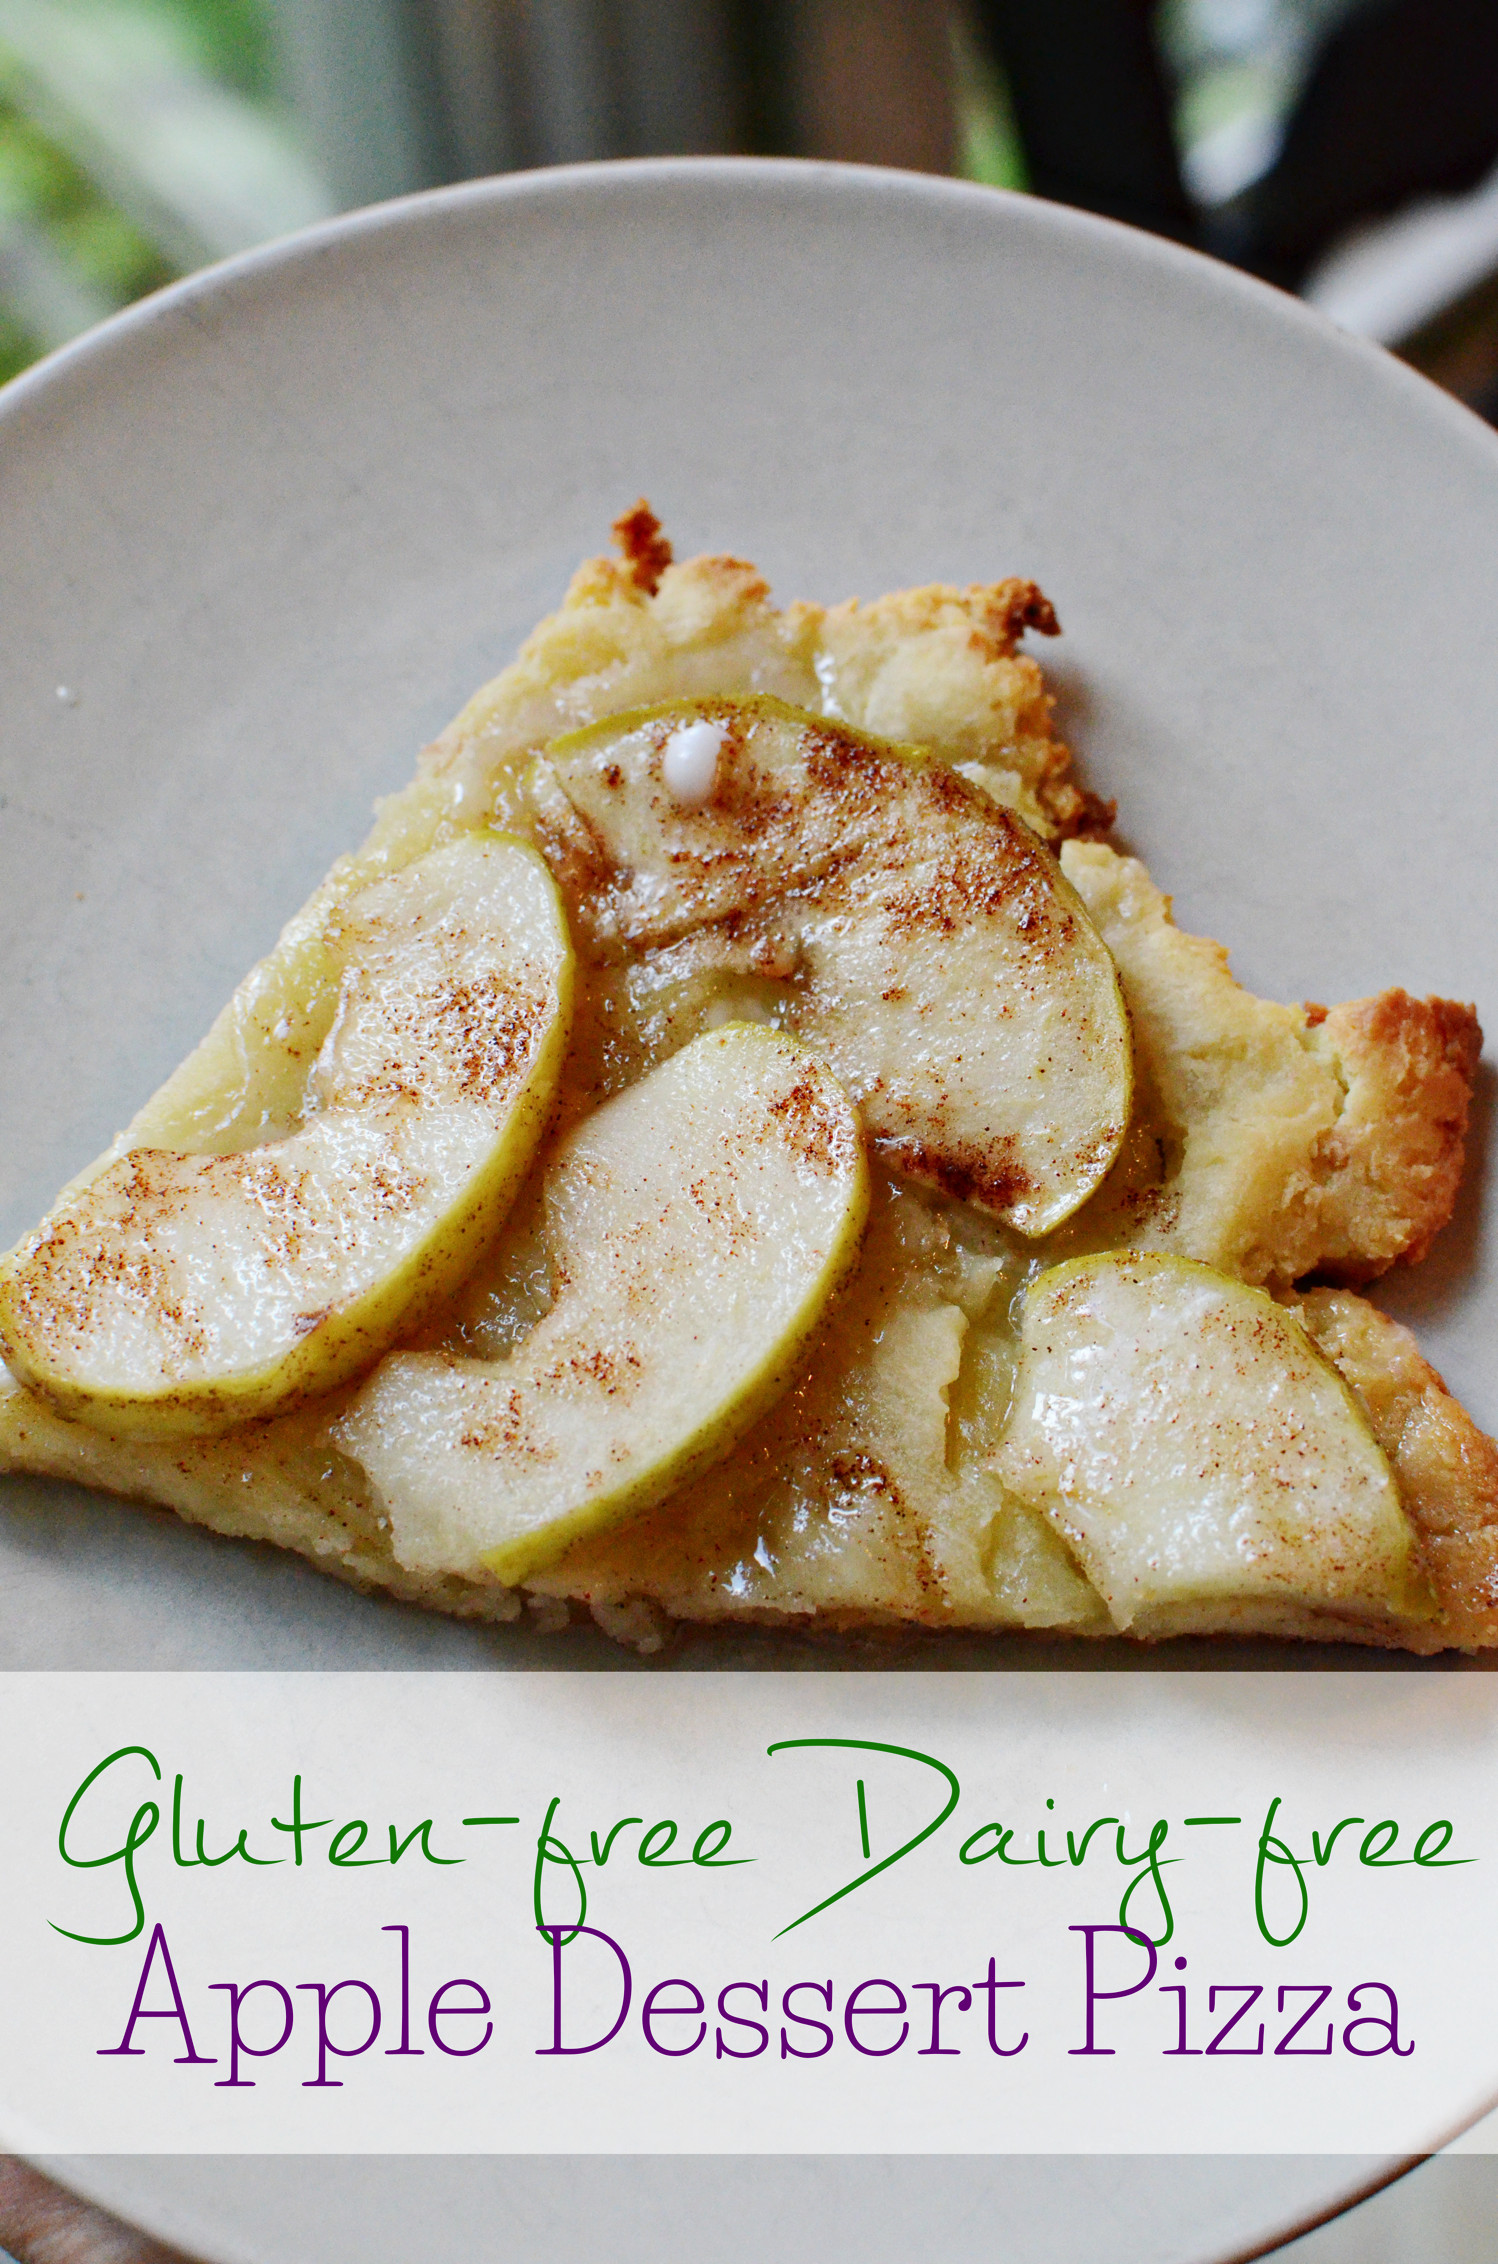 Gluten And Dairy Free Desserts To Buy
 Gluten Free Dairy Free Apple Dessert Pizza • Really Are